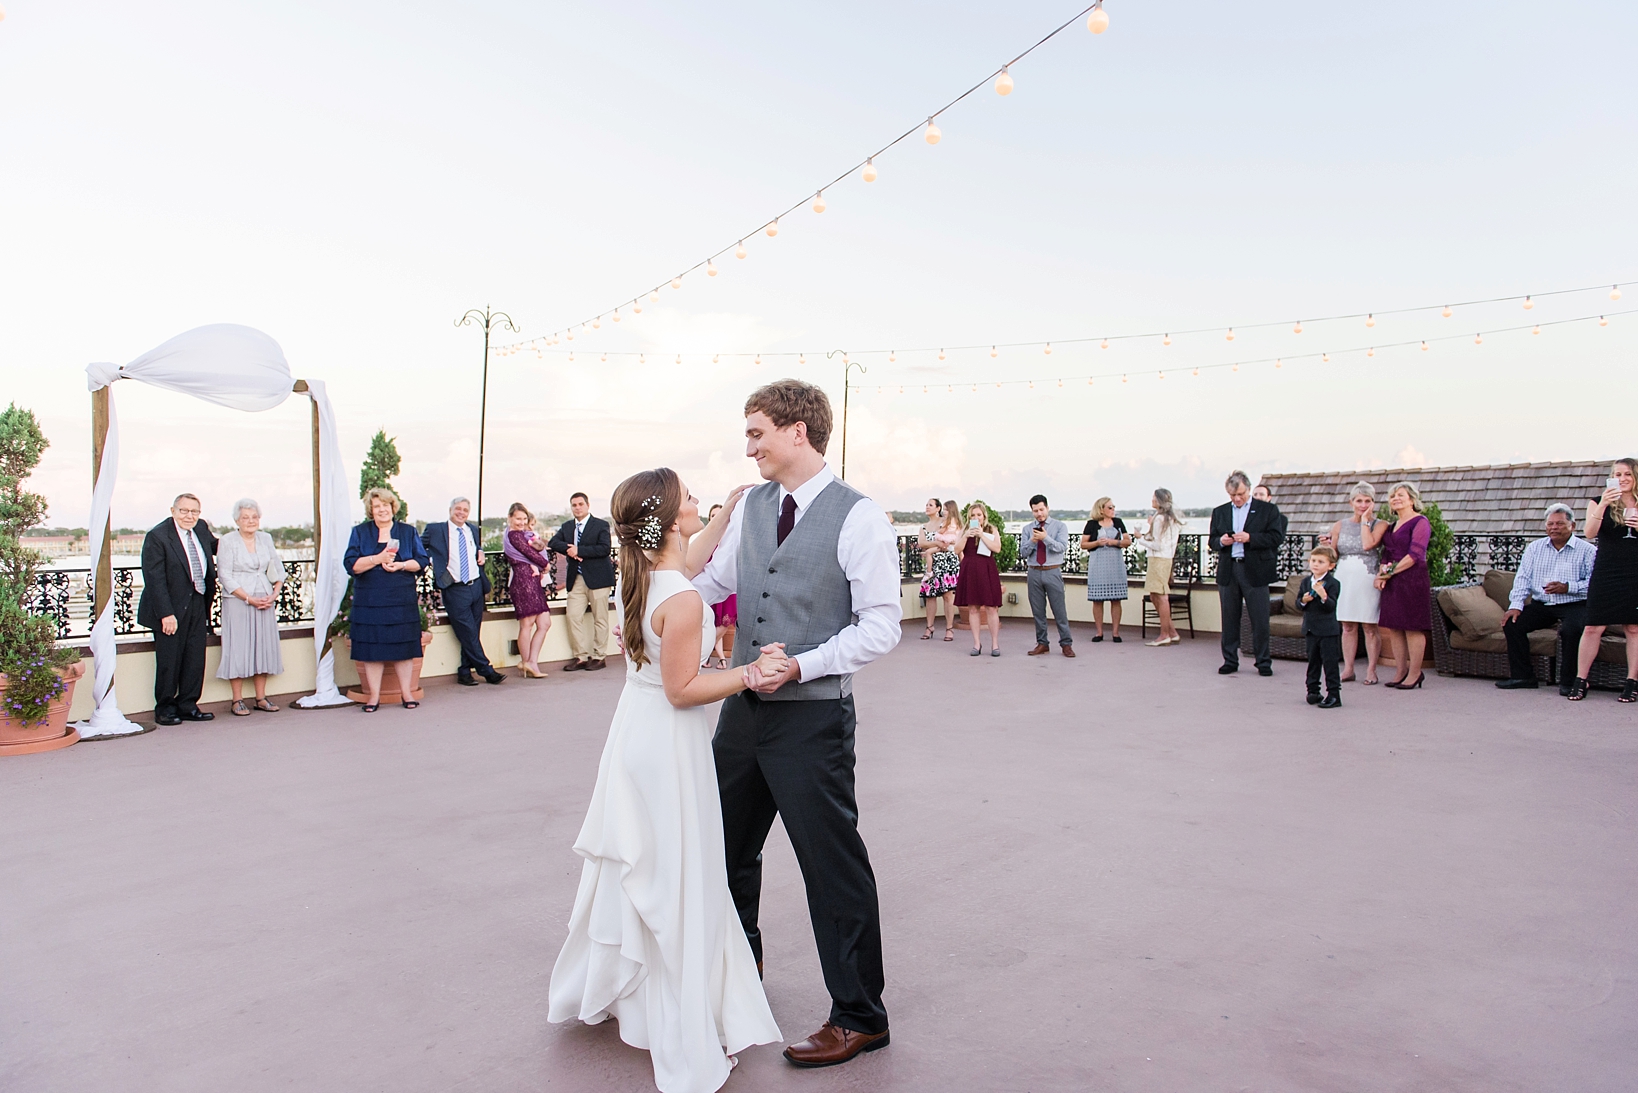 First dance with all their friends and family surrounding them on the open air rooftop deck